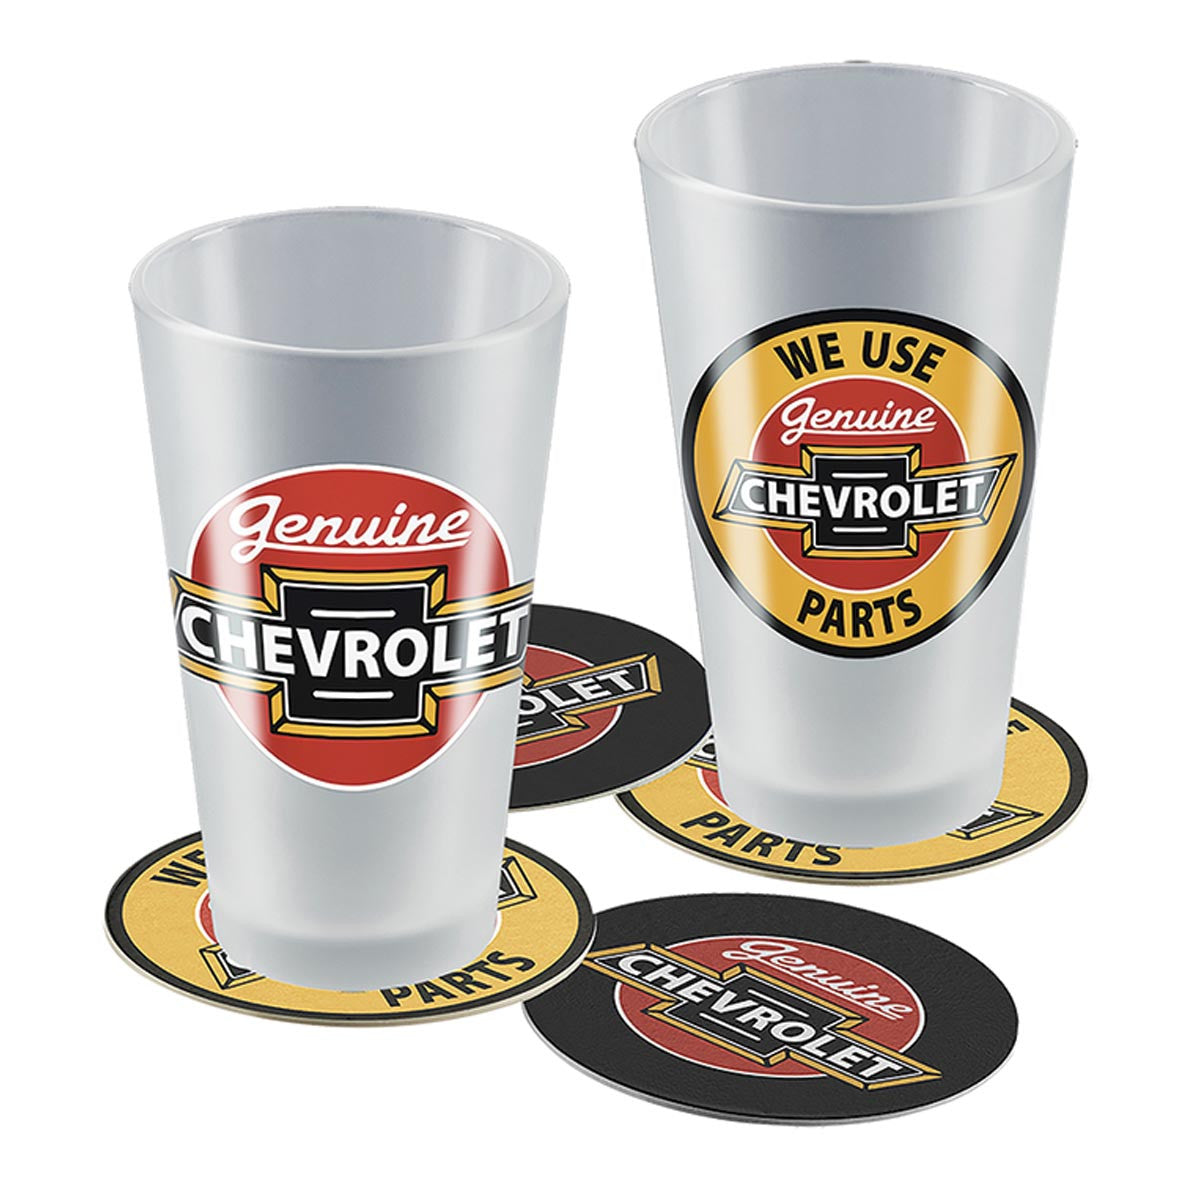 Chevrolet Frosted Pint Glass Set - 2 Glasses